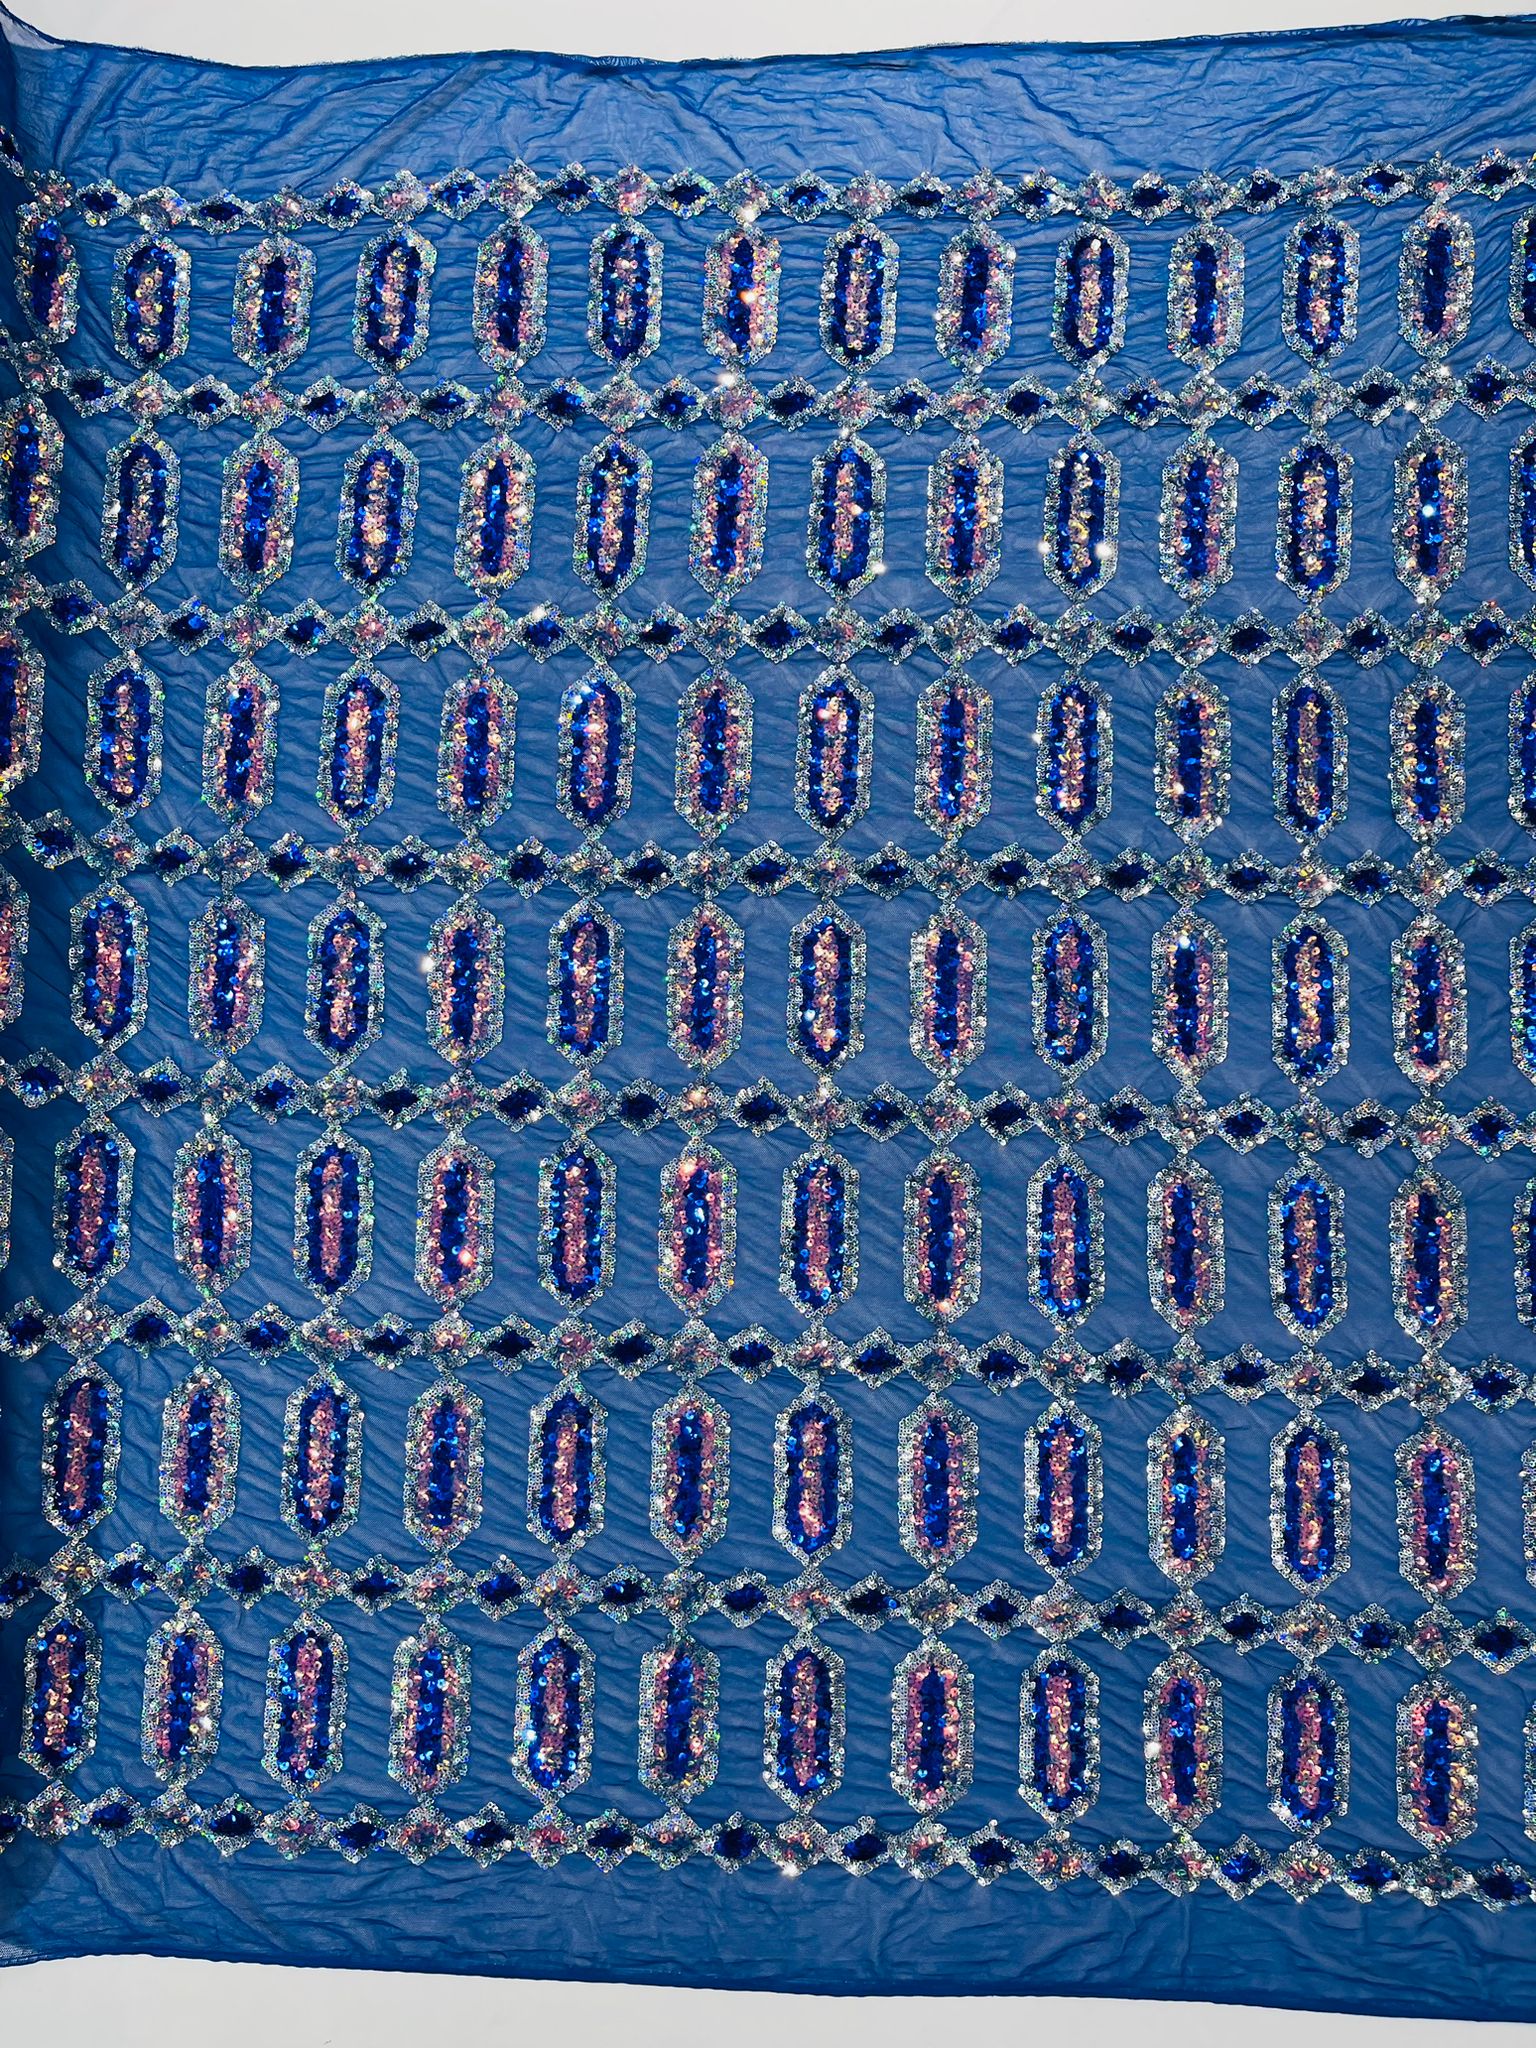 Royal Blue/Silver multi color iridescent Jewel sequin design on a Royal Blue 4 way stretch mesh fabric.